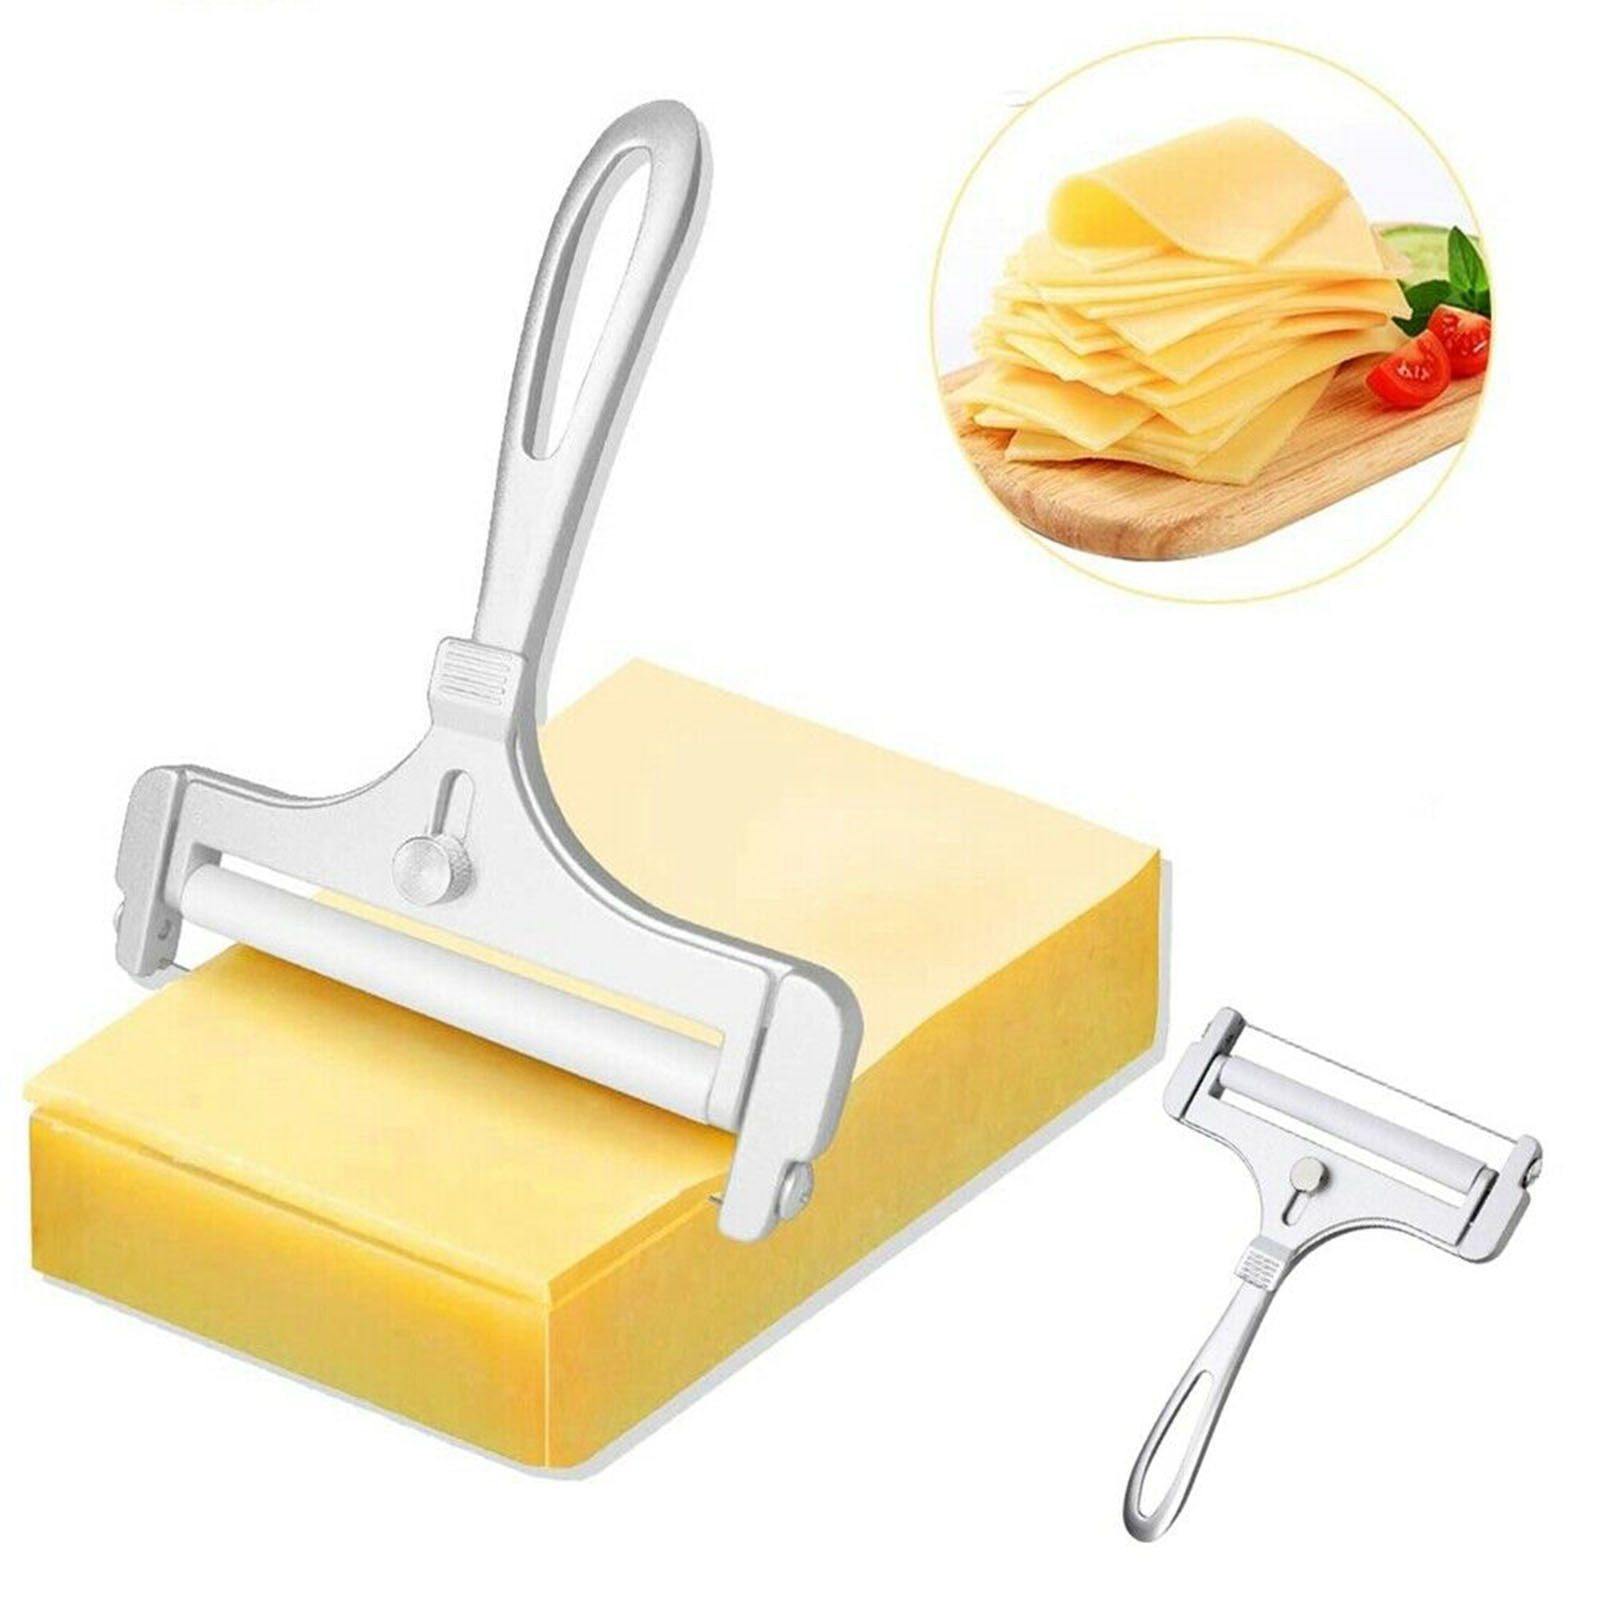 Bellemain Stainless Steel Wire Cheese Slicer - Hand Held Cheese